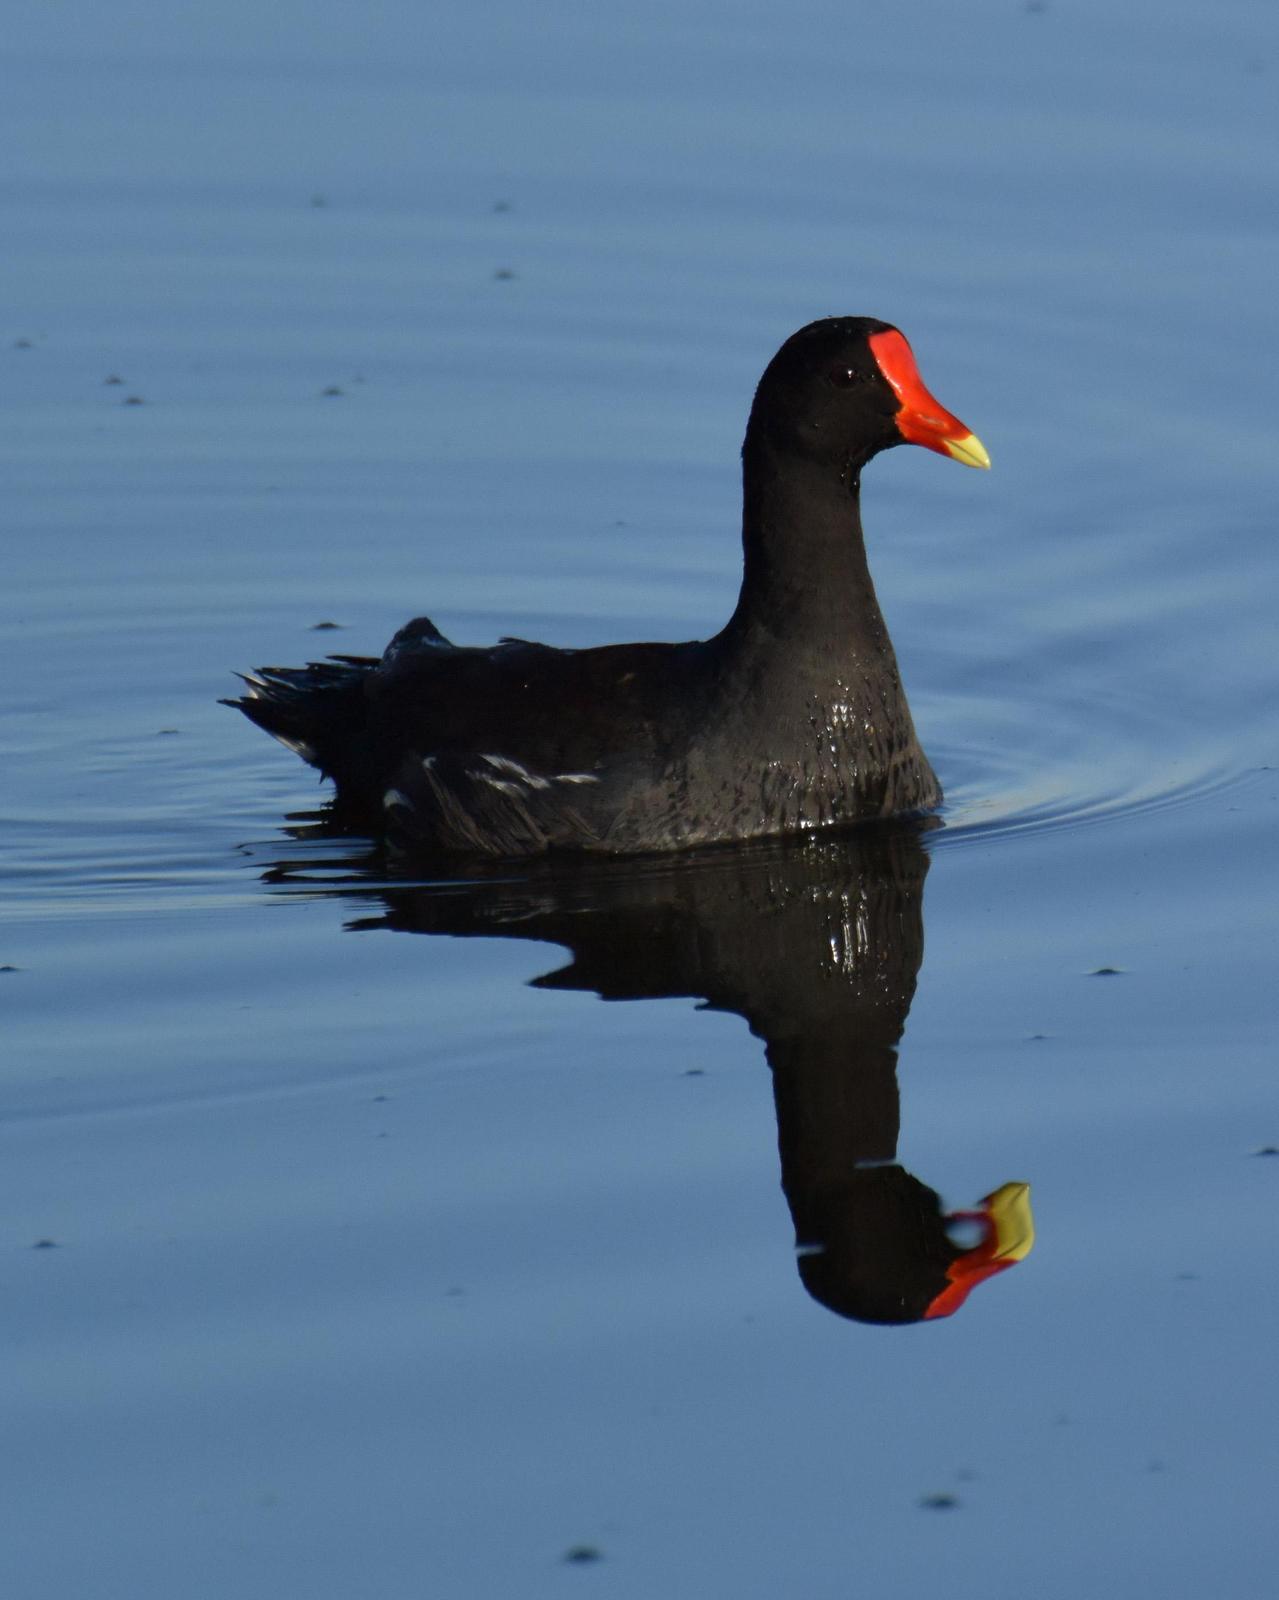 Common Gallinule Photo by Emily Percival